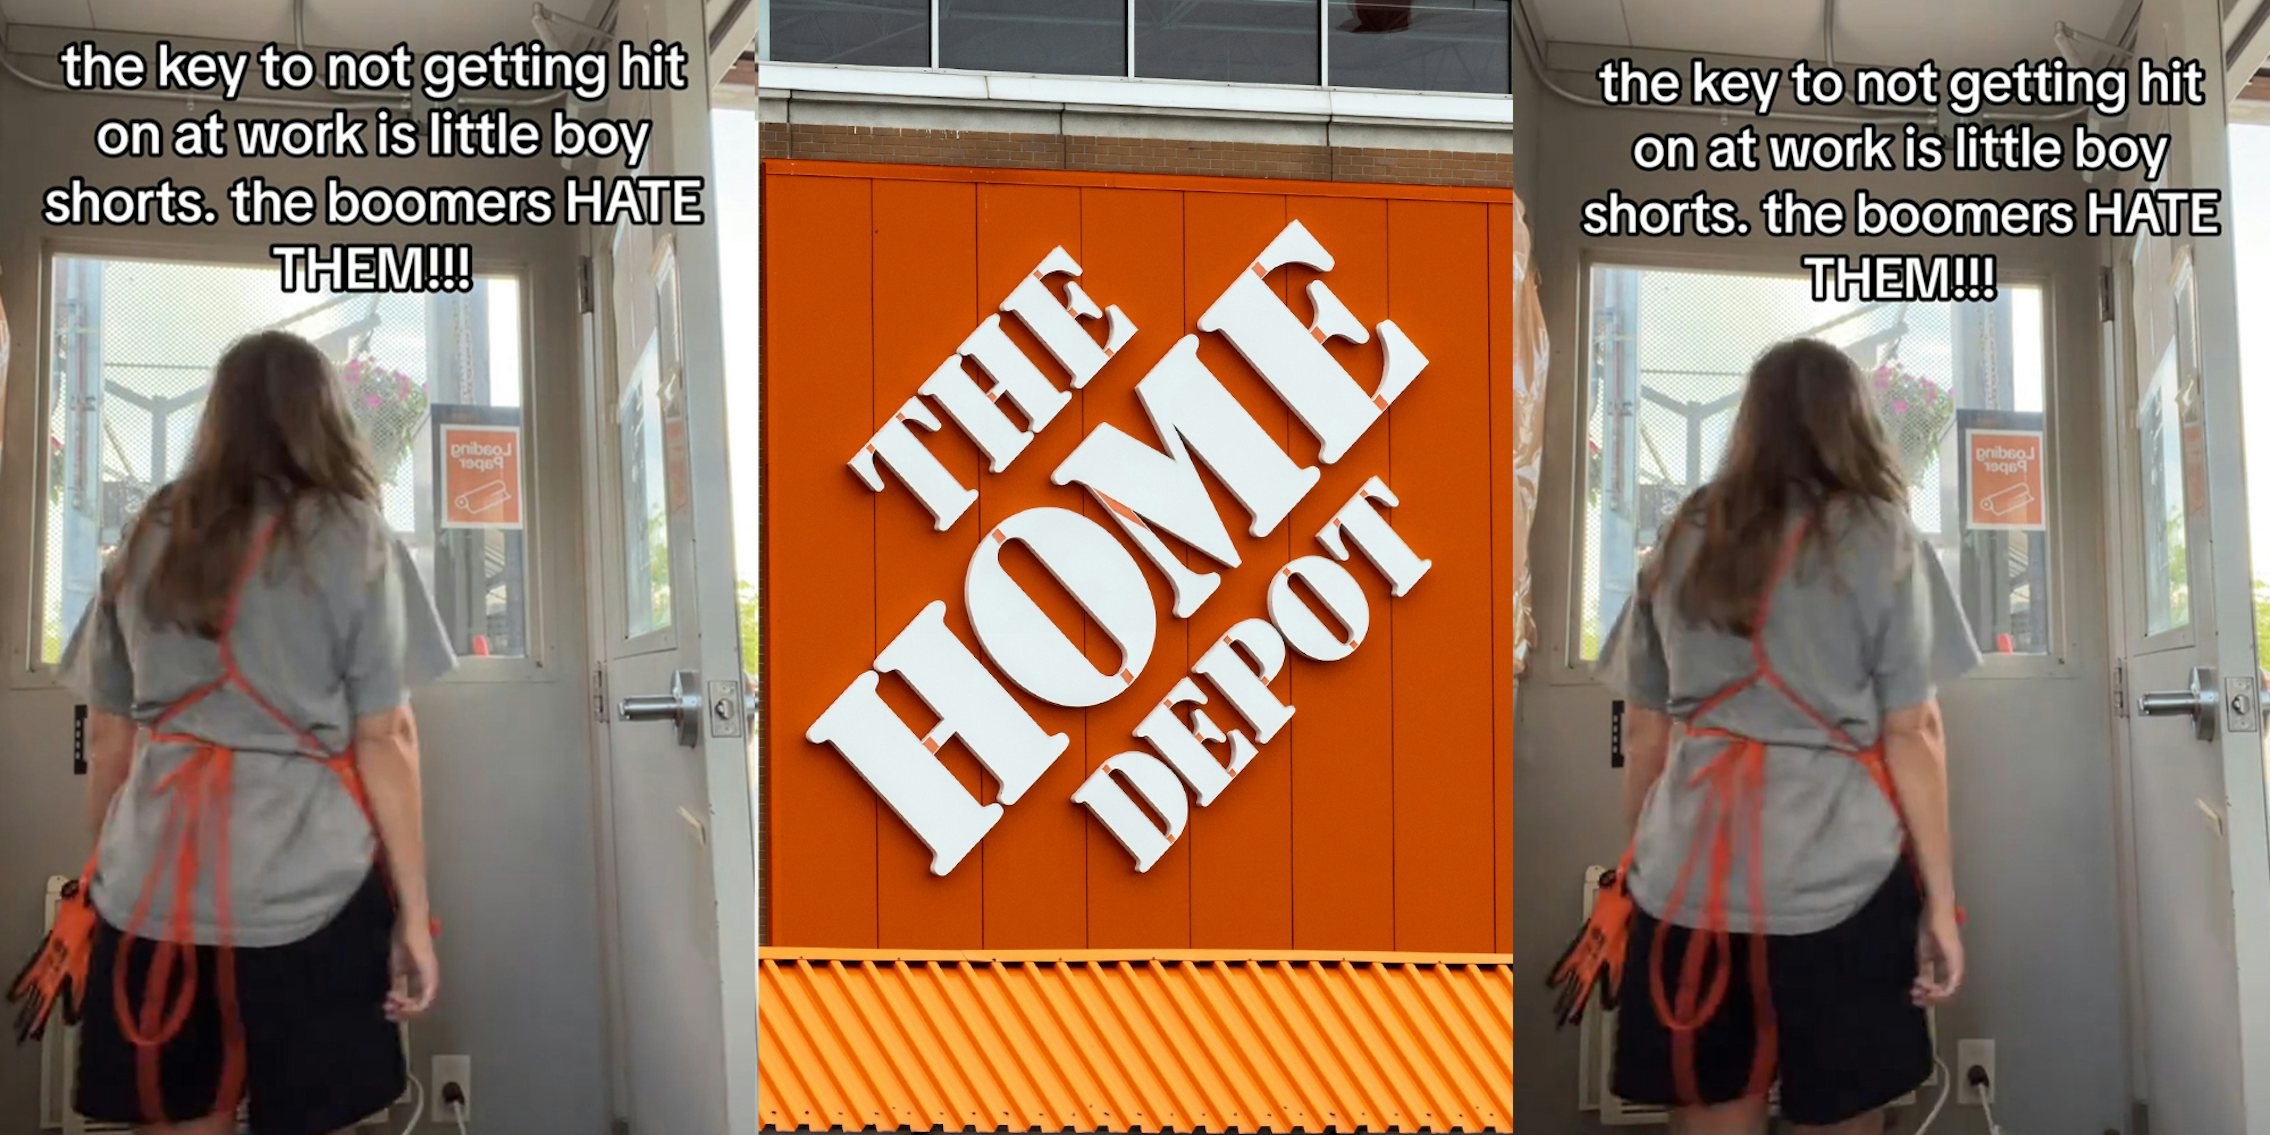 Home Depot Worker wearing grey shirt with apron and boy shorts